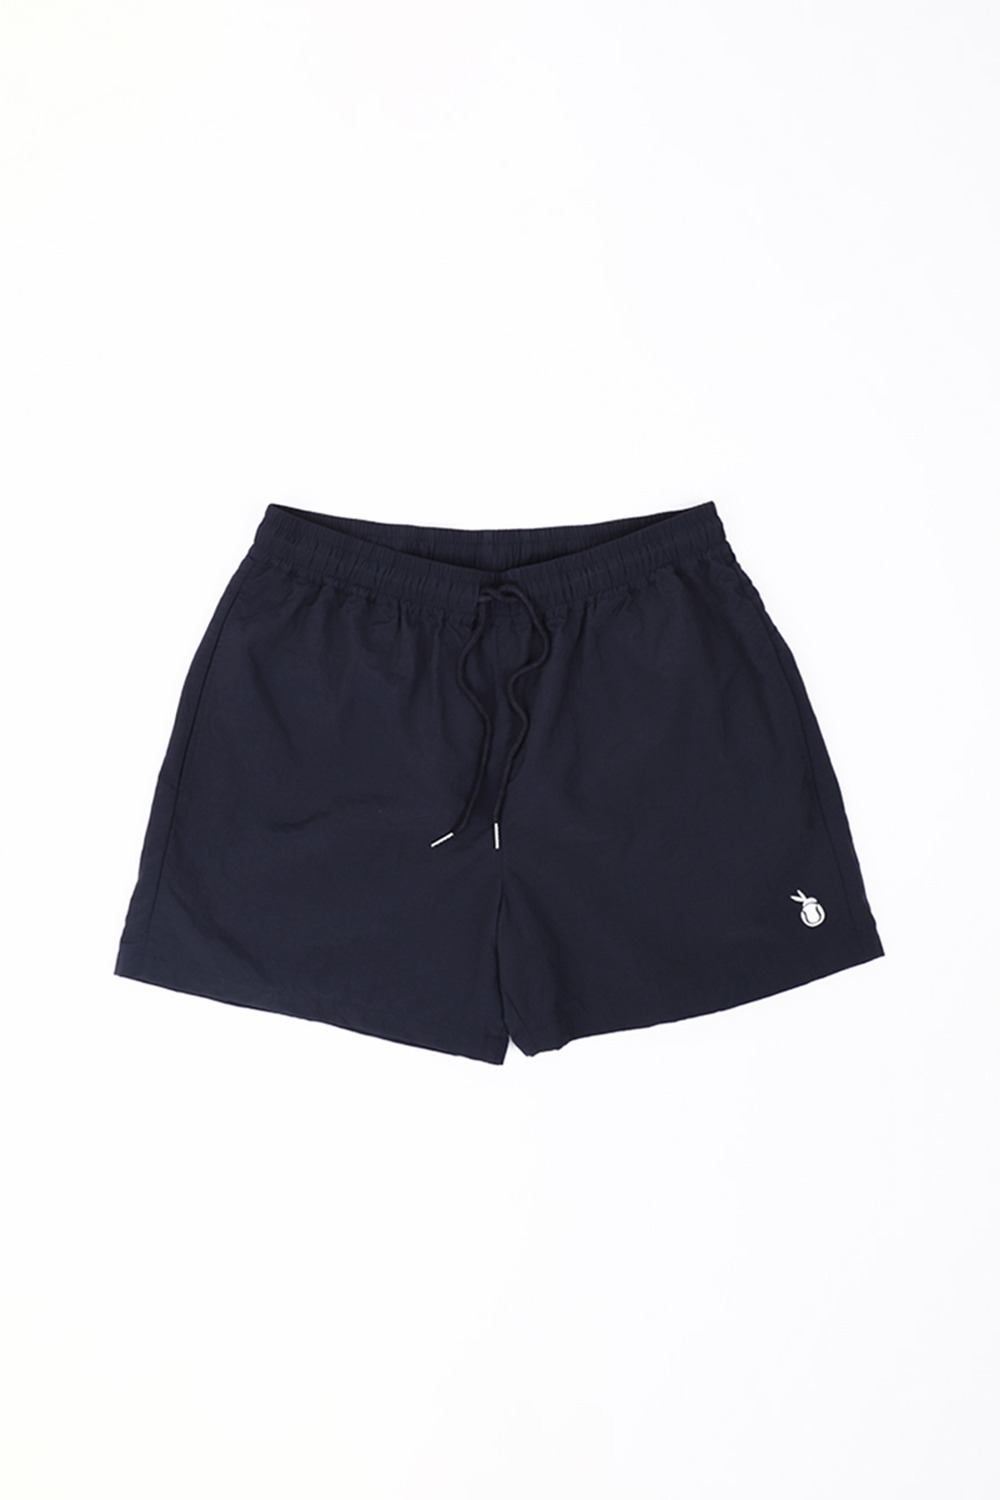 Clever Symbol Embroidered Athleisure Shorts (Black) RICHEZ